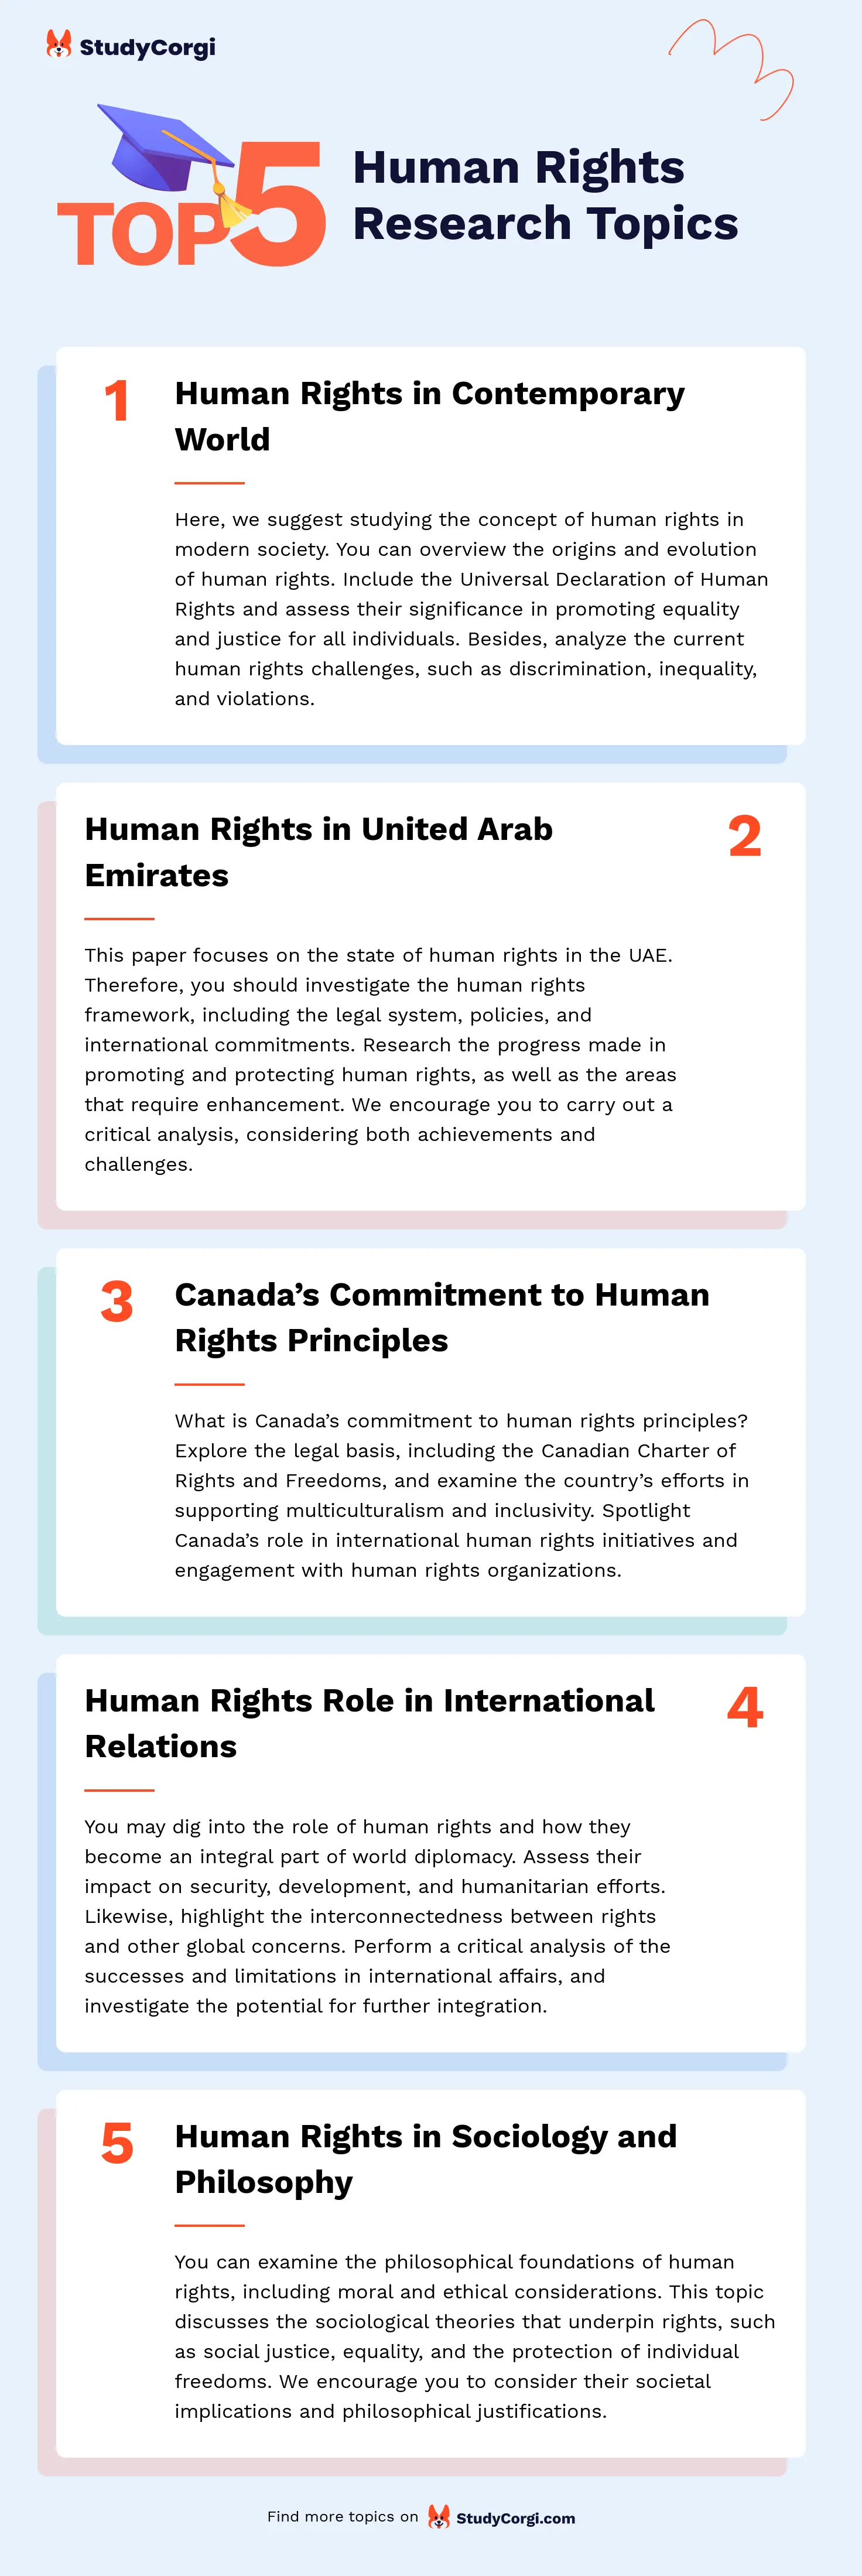 TOP-5 Human Rights Research Topics